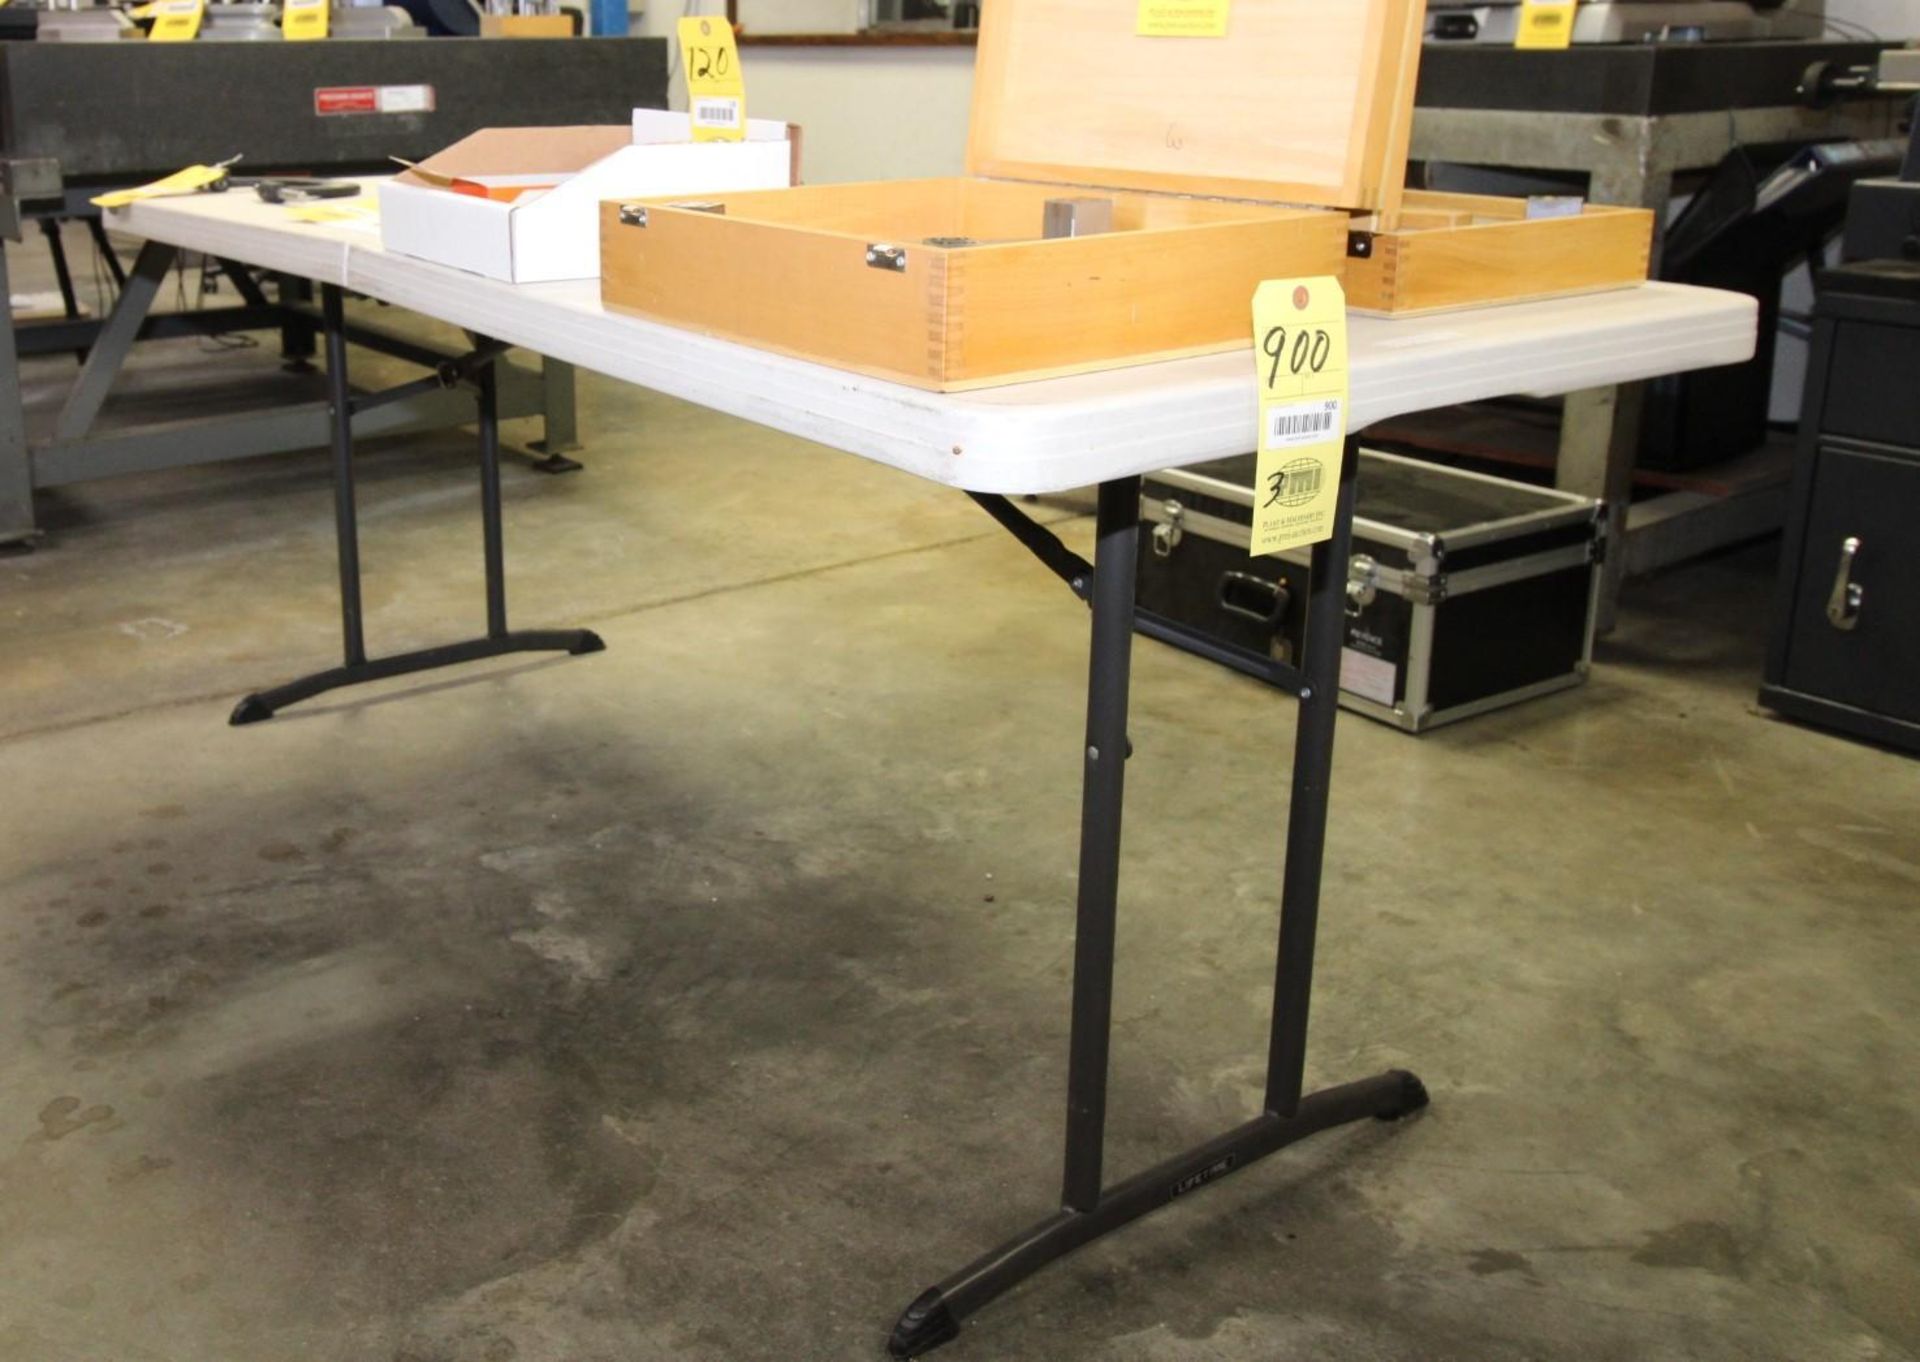 LOT OF LIFETIME CENTER FOLDING TABLES (3), 30"W. x 72"L. (Note: two week delayed removal)